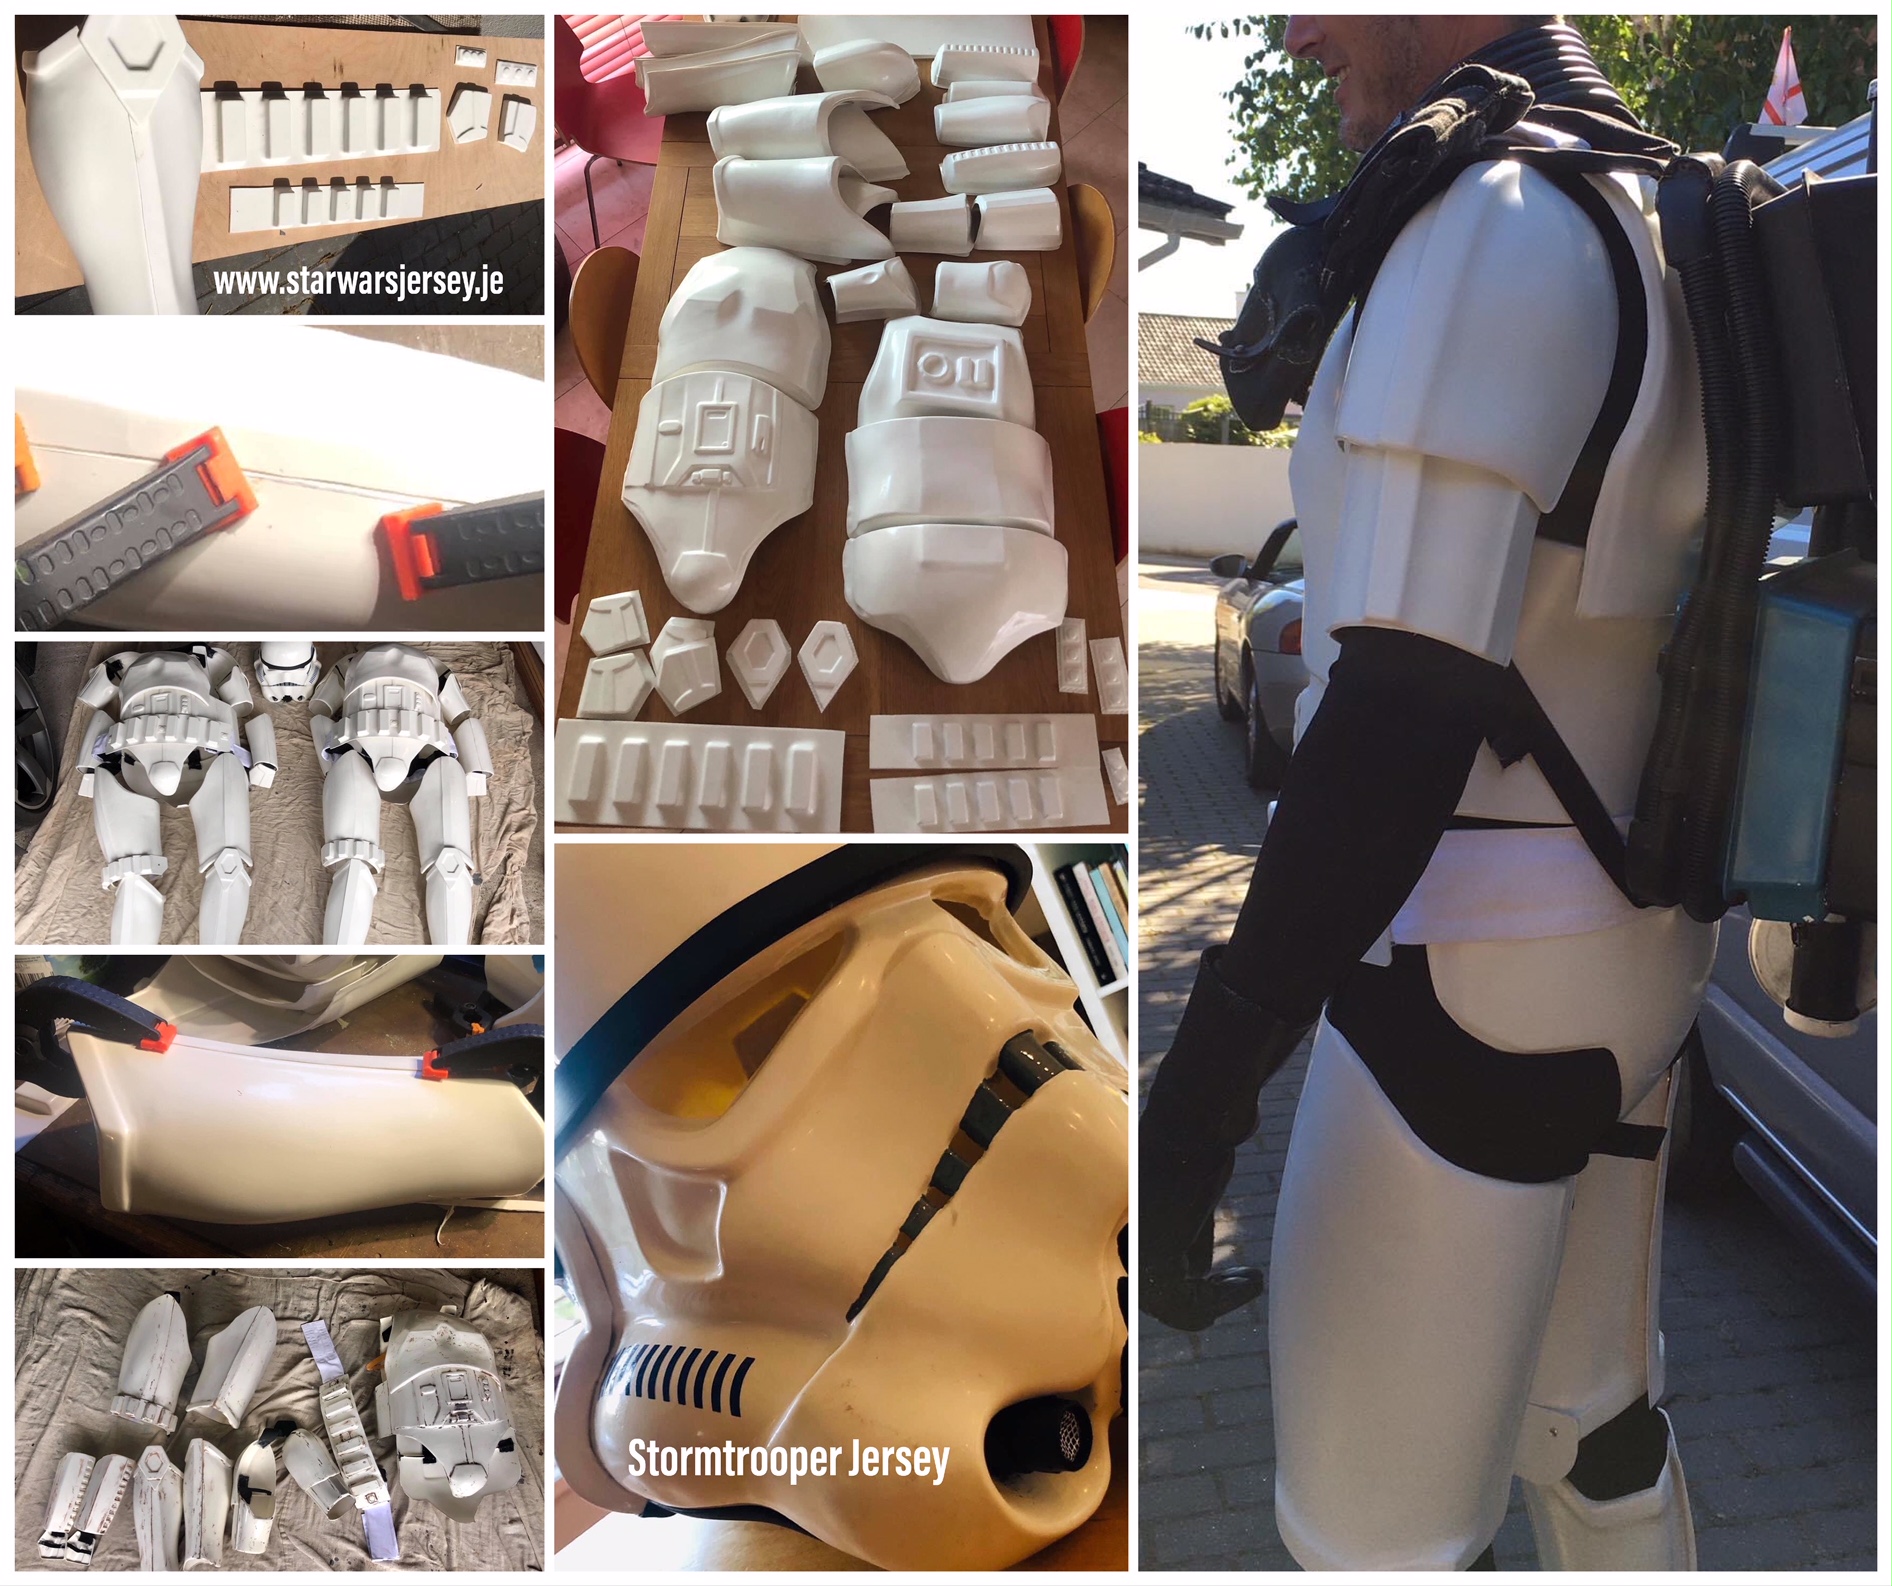 A montage of photos showing Sandtrooper armour at various stages of production and assembly.